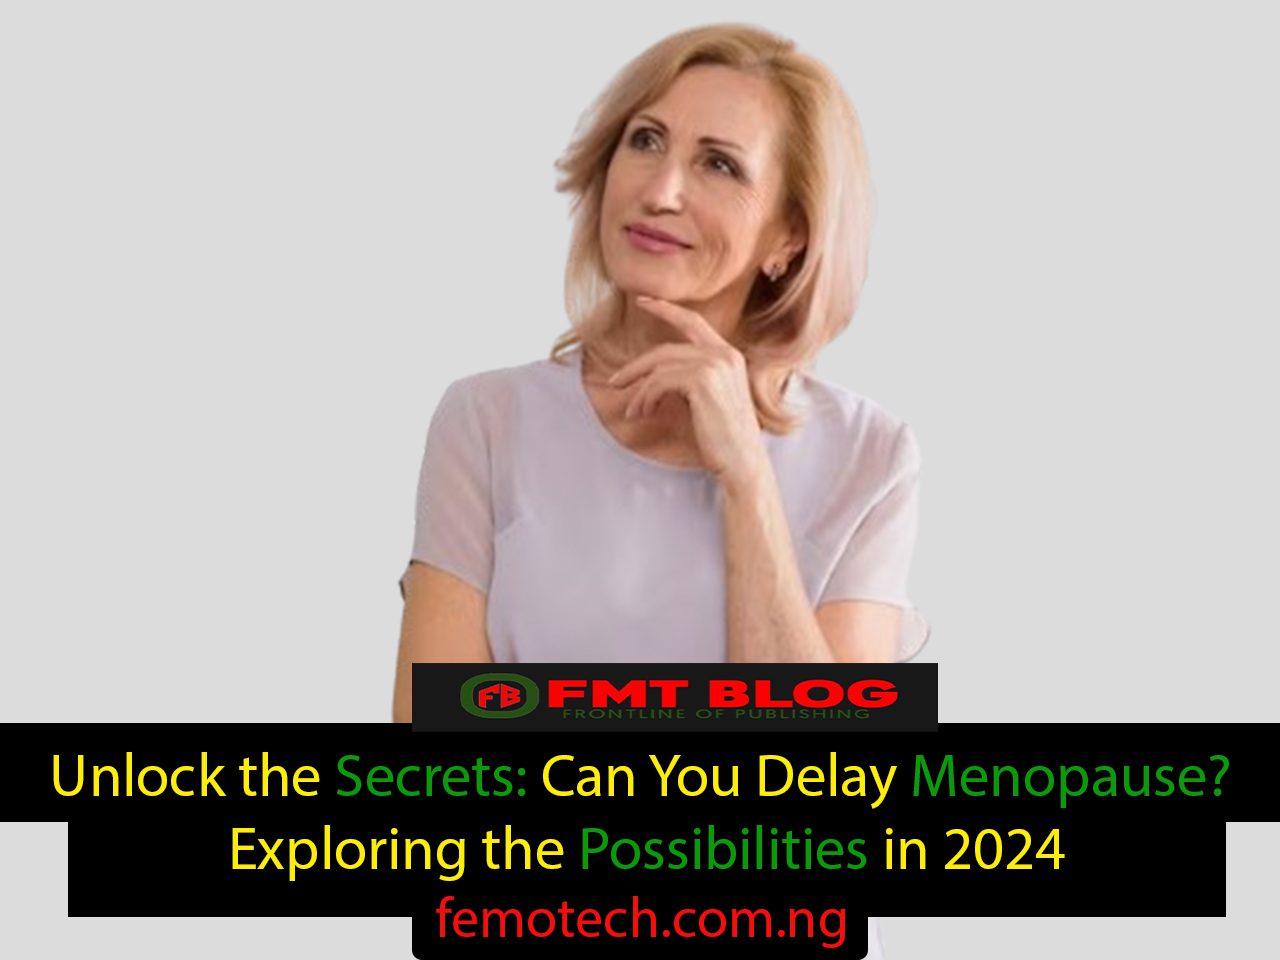 Unlock the Secrets: Can You Delay Menopause? Exploring the Possibilities in 2024